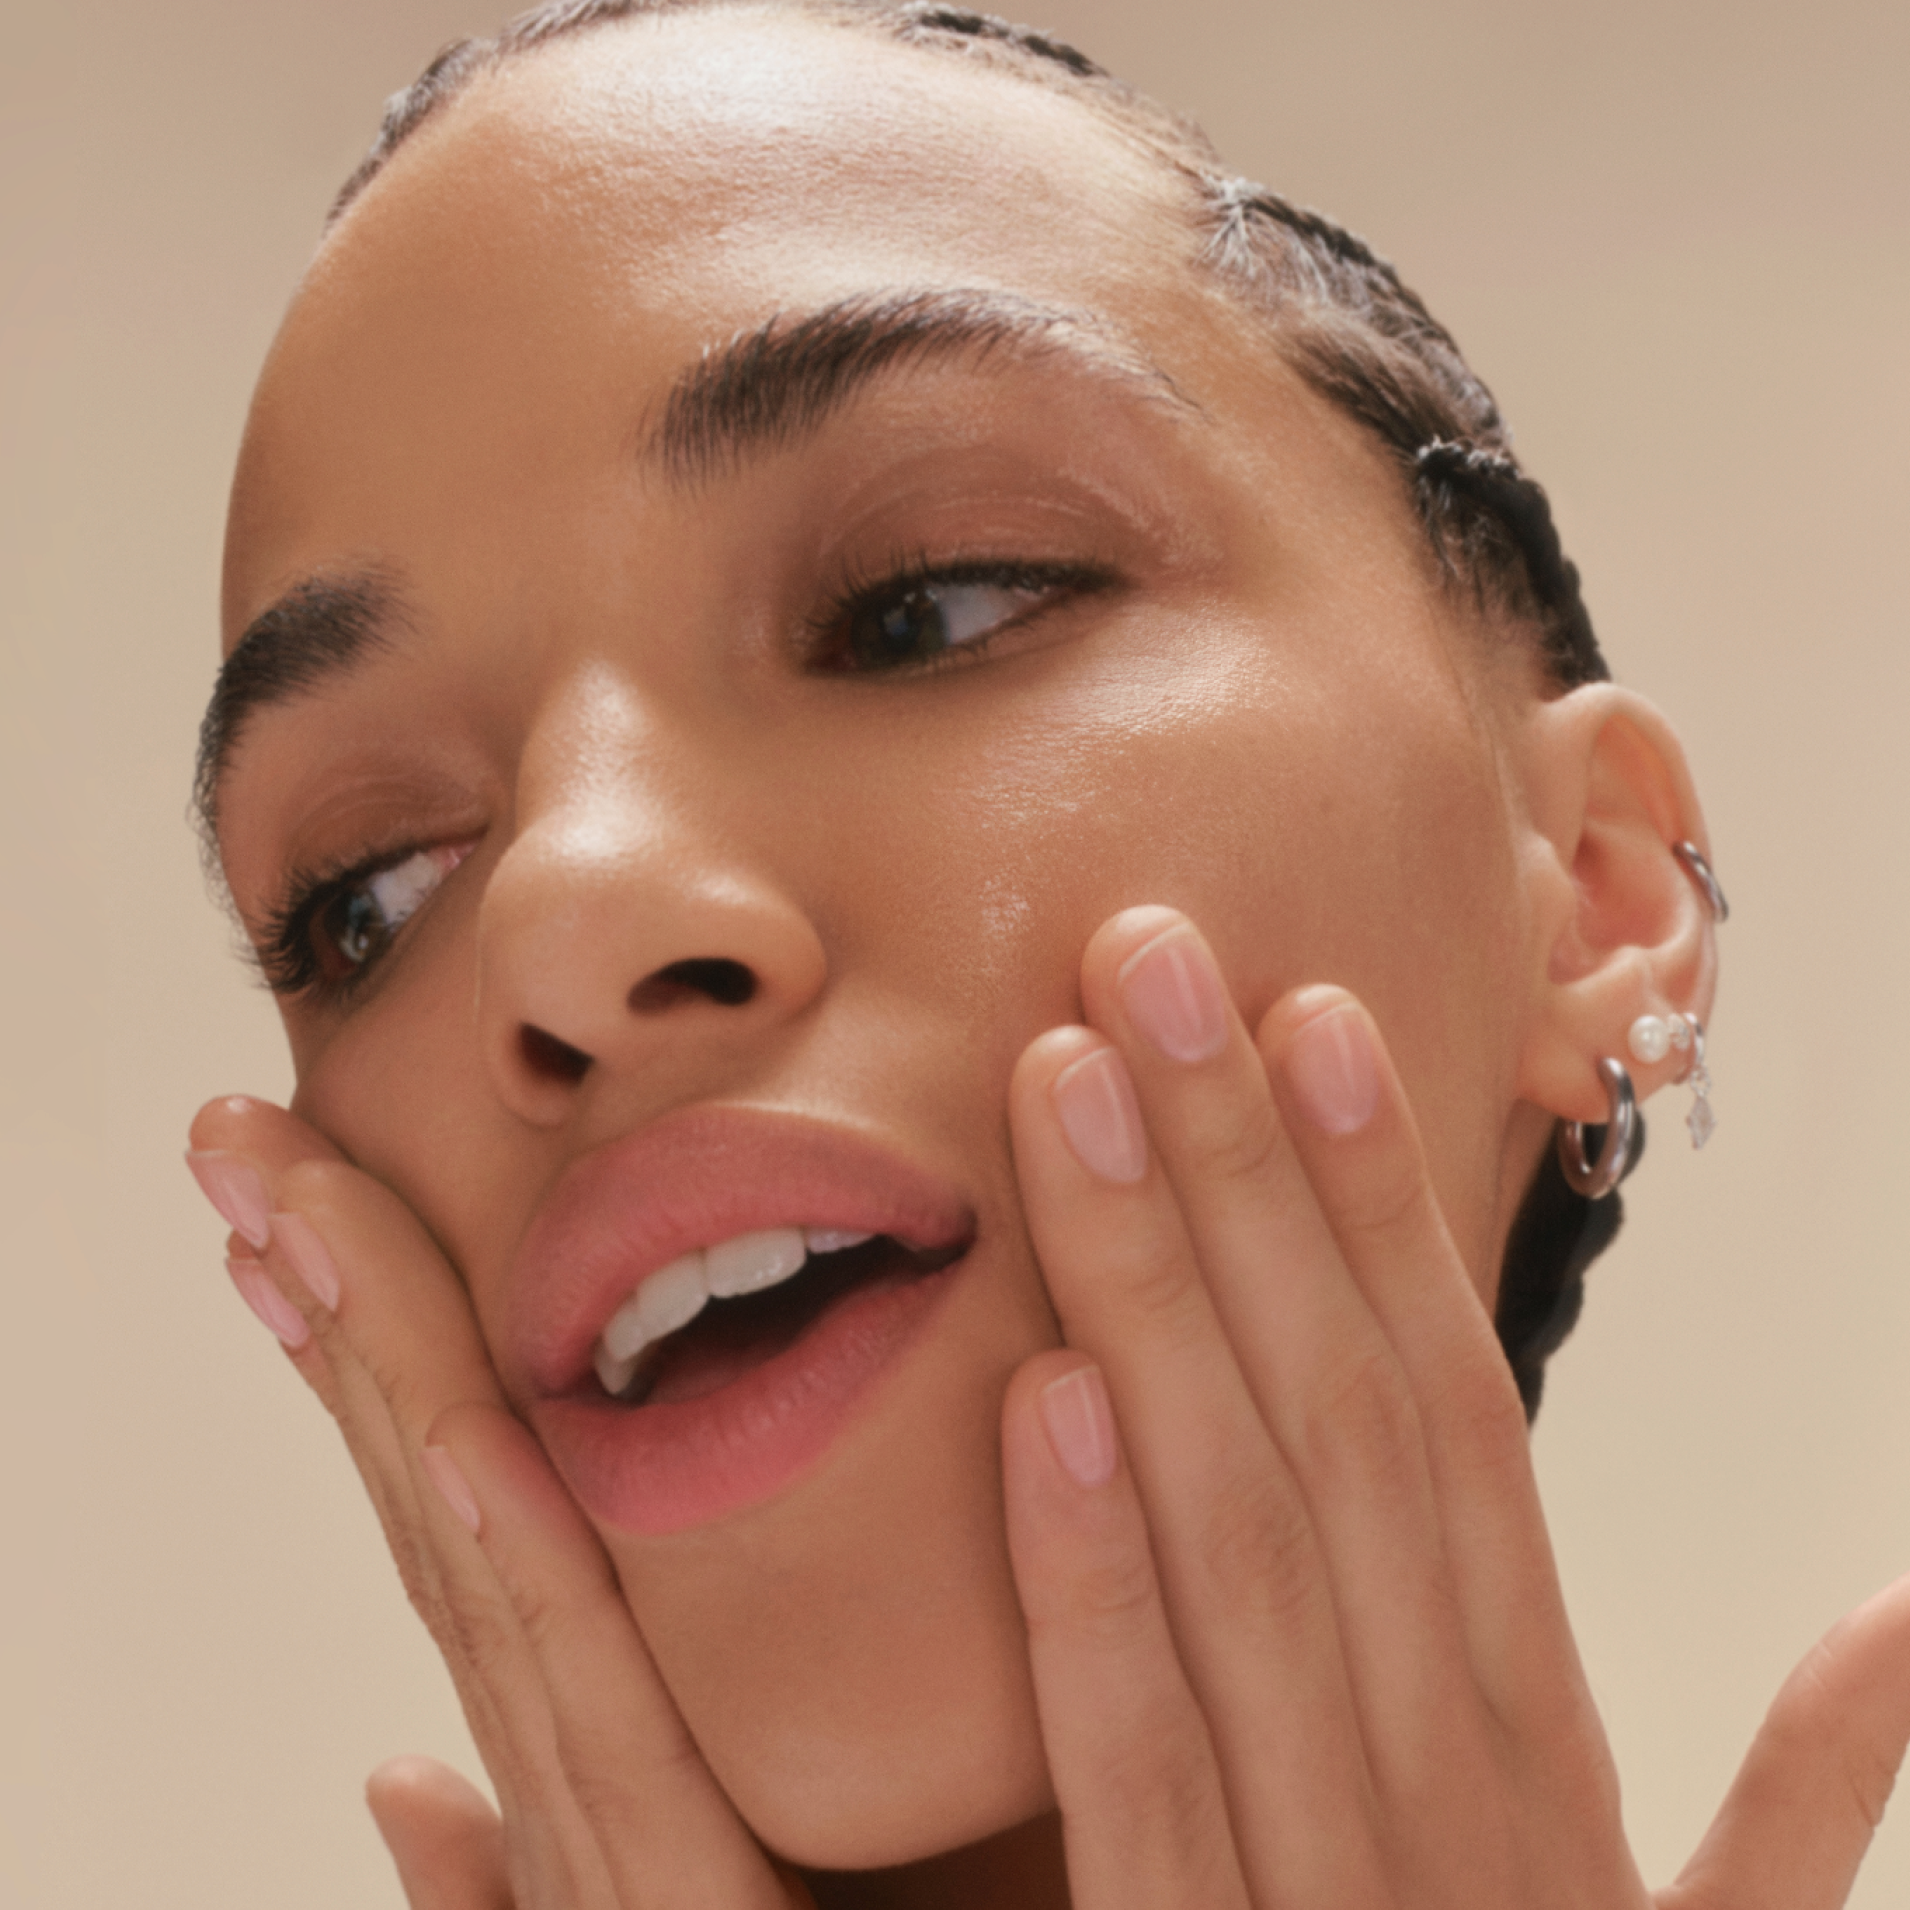 Close-up portrait of a smiling young woman with braids with both hands on her face rubbing in a skincare product on a warm beige background.